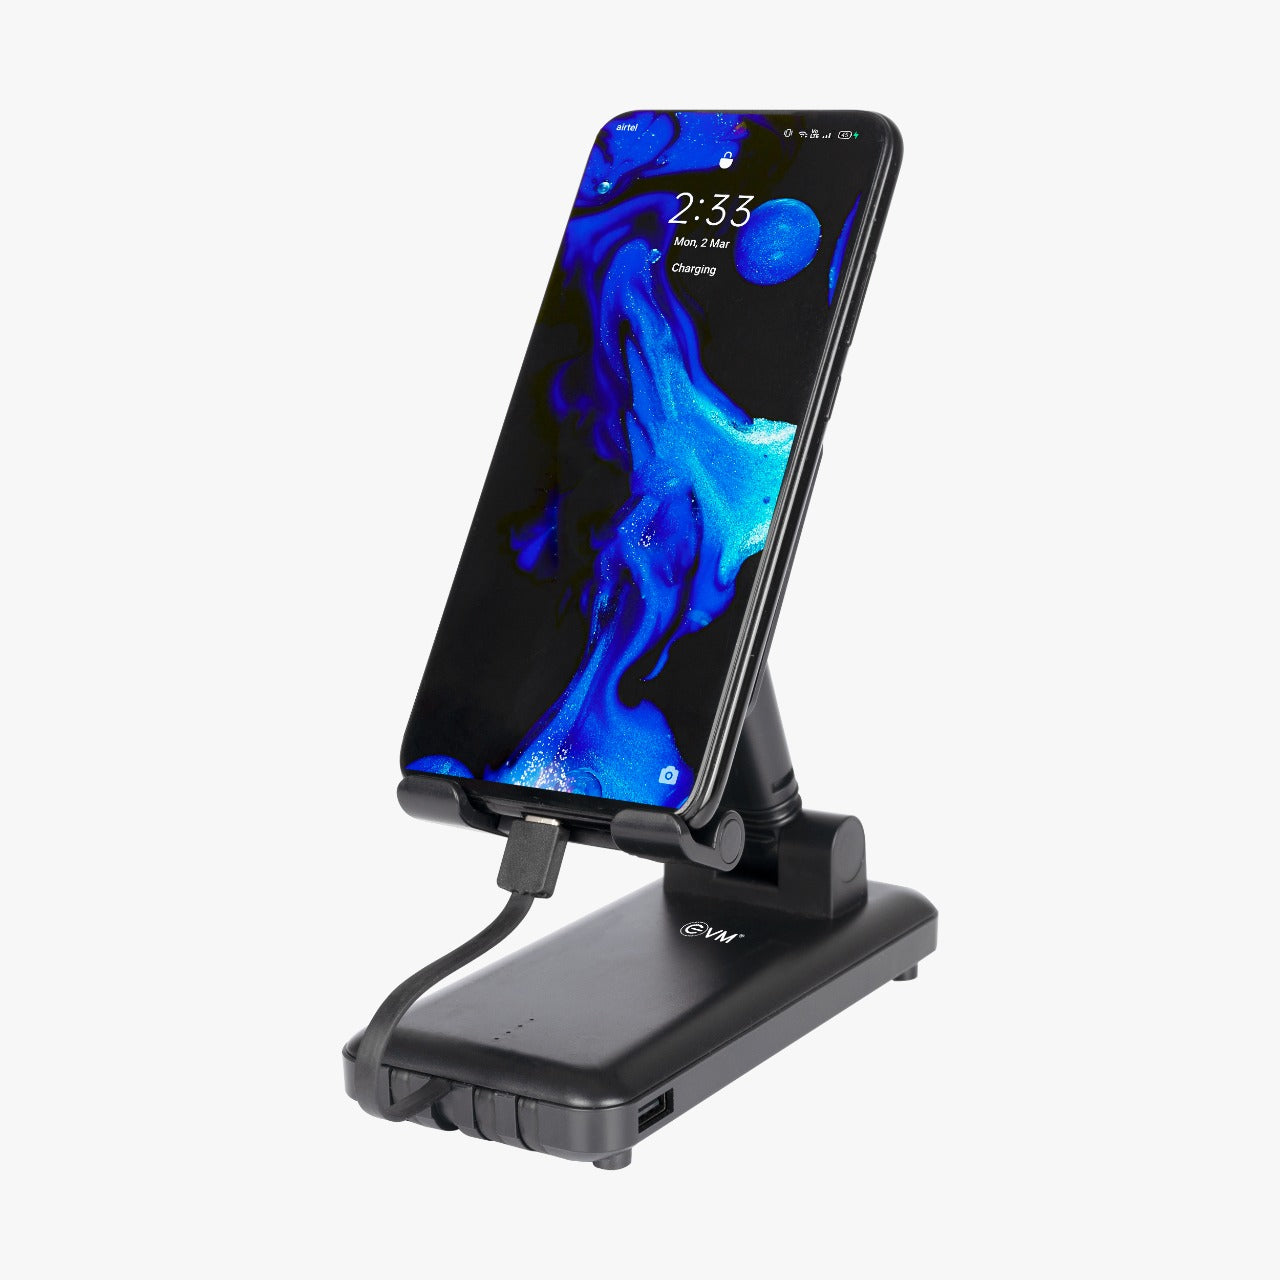 Personalized Black 10000mAh Power Bank cum Mobile Stand - For Corporate Gifting, Event Gifting, Freebies, Promotions - EnCase Pro P0206